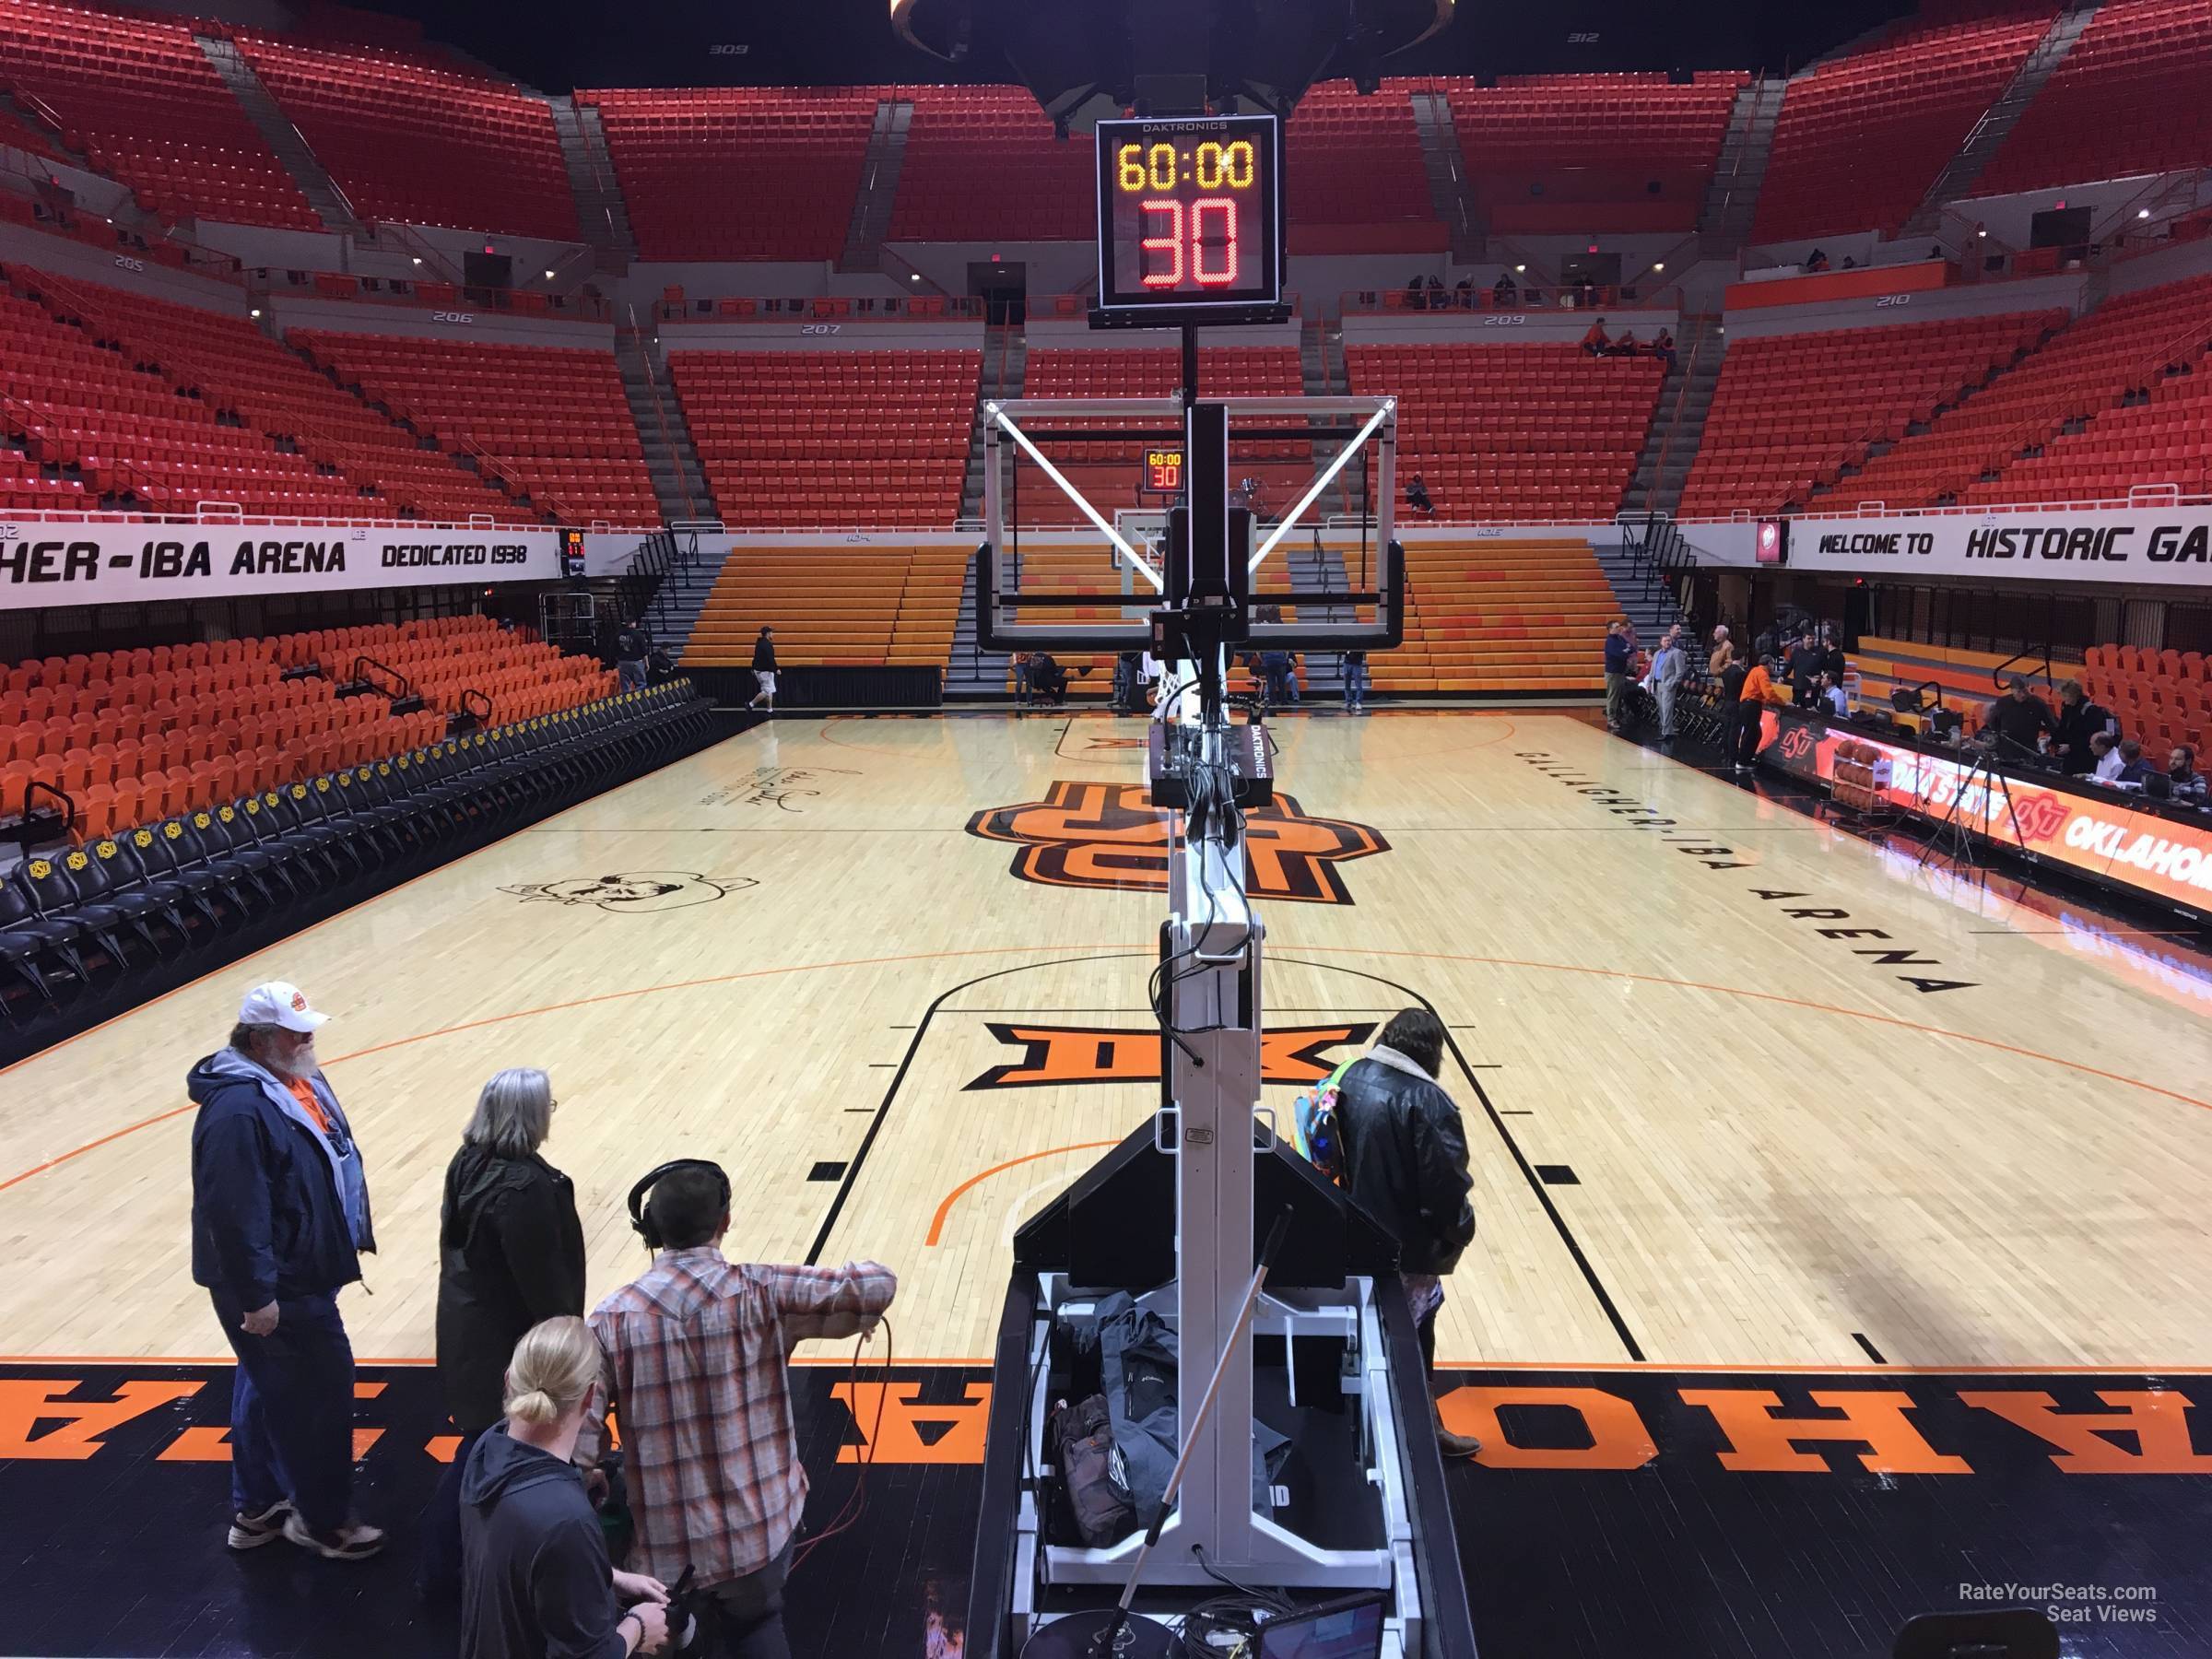 section 111, row 6 seat view  - gallagher-iba arena